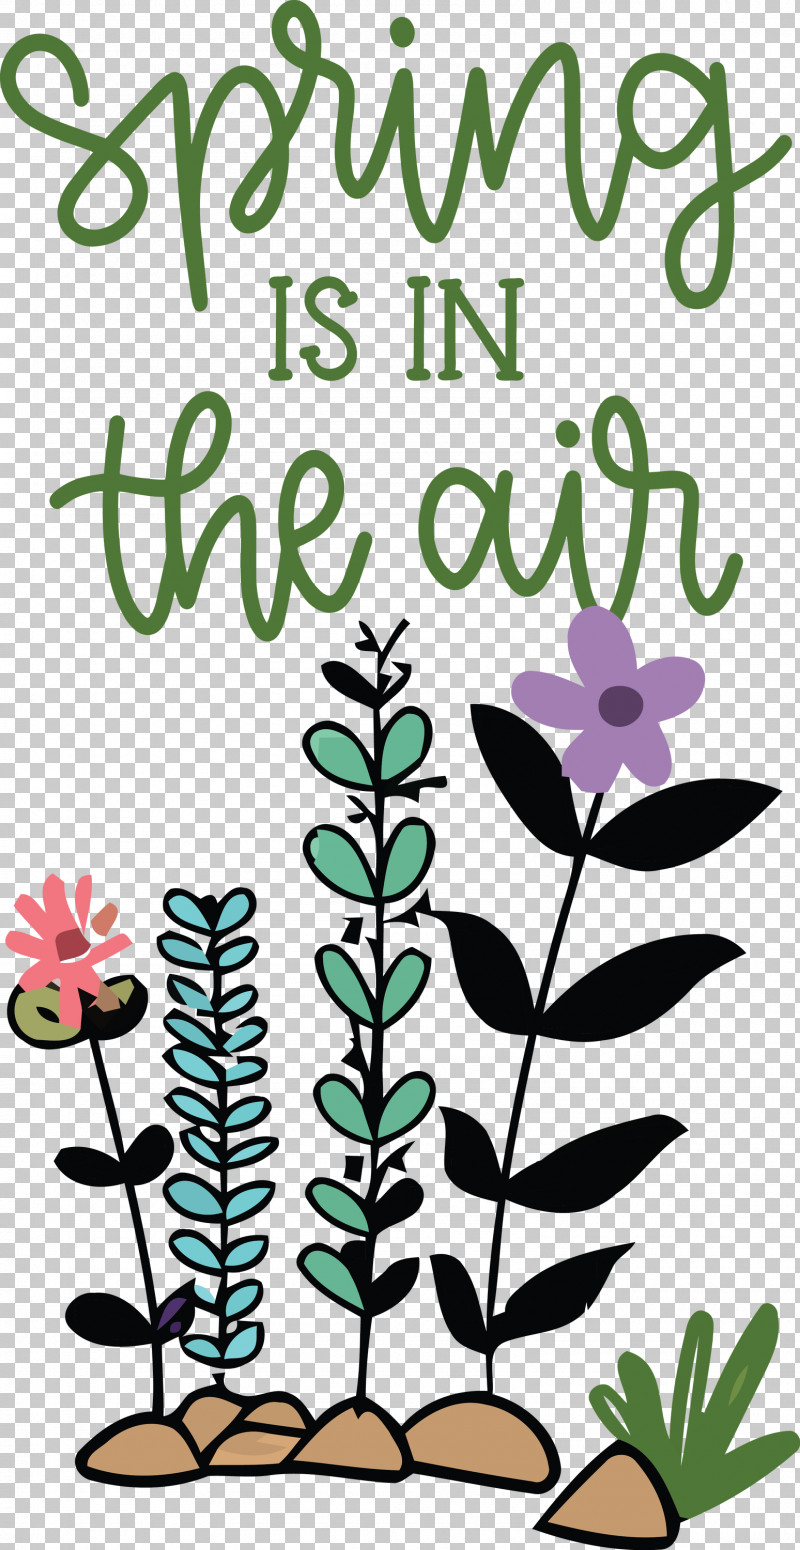 Spring Is In The Air Spring PNG, Clipart, Data, Floral Design, Free, Leaf, Plant Stem Free PNG Download